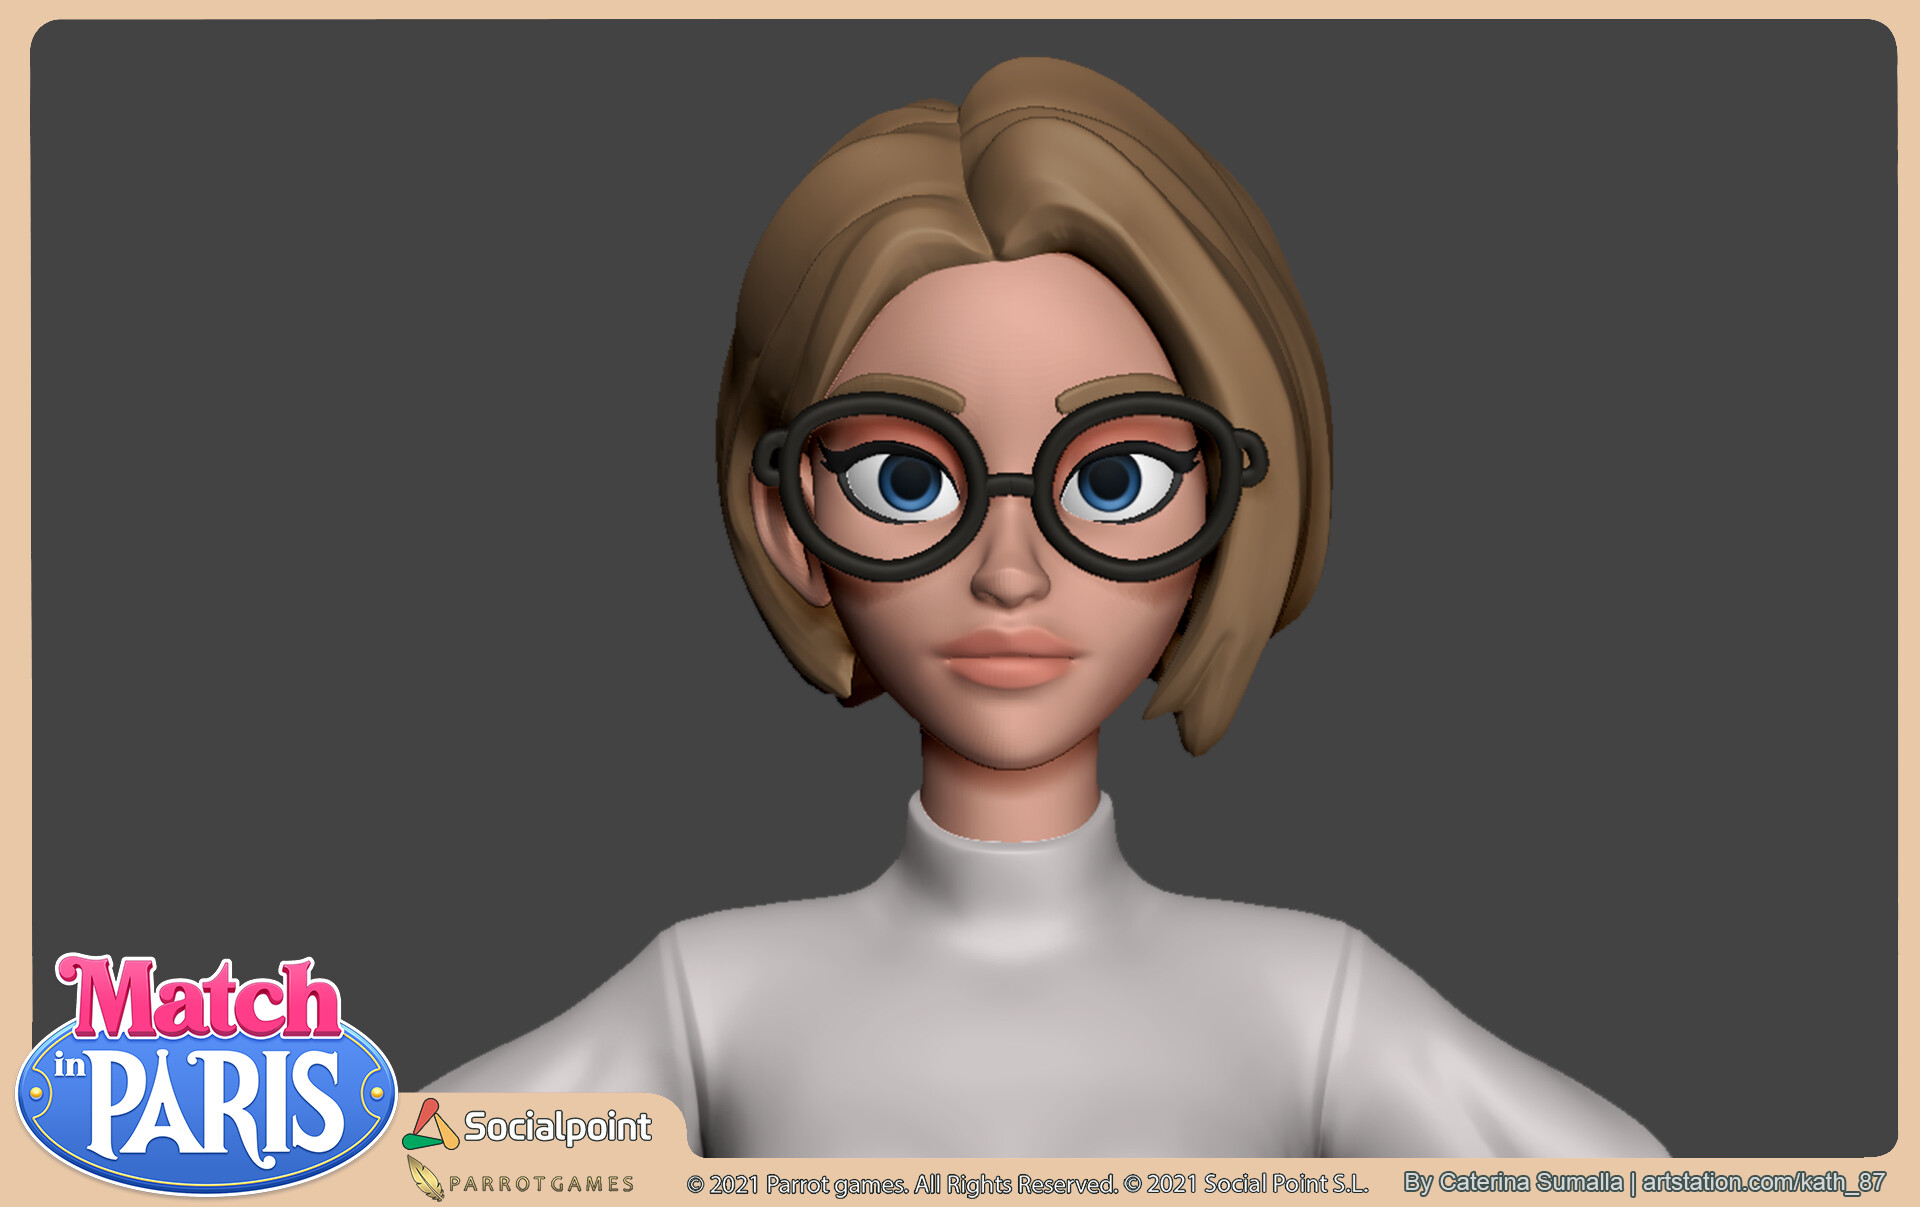 ArtStation - LadyFly from the new Miraculous World: Paris